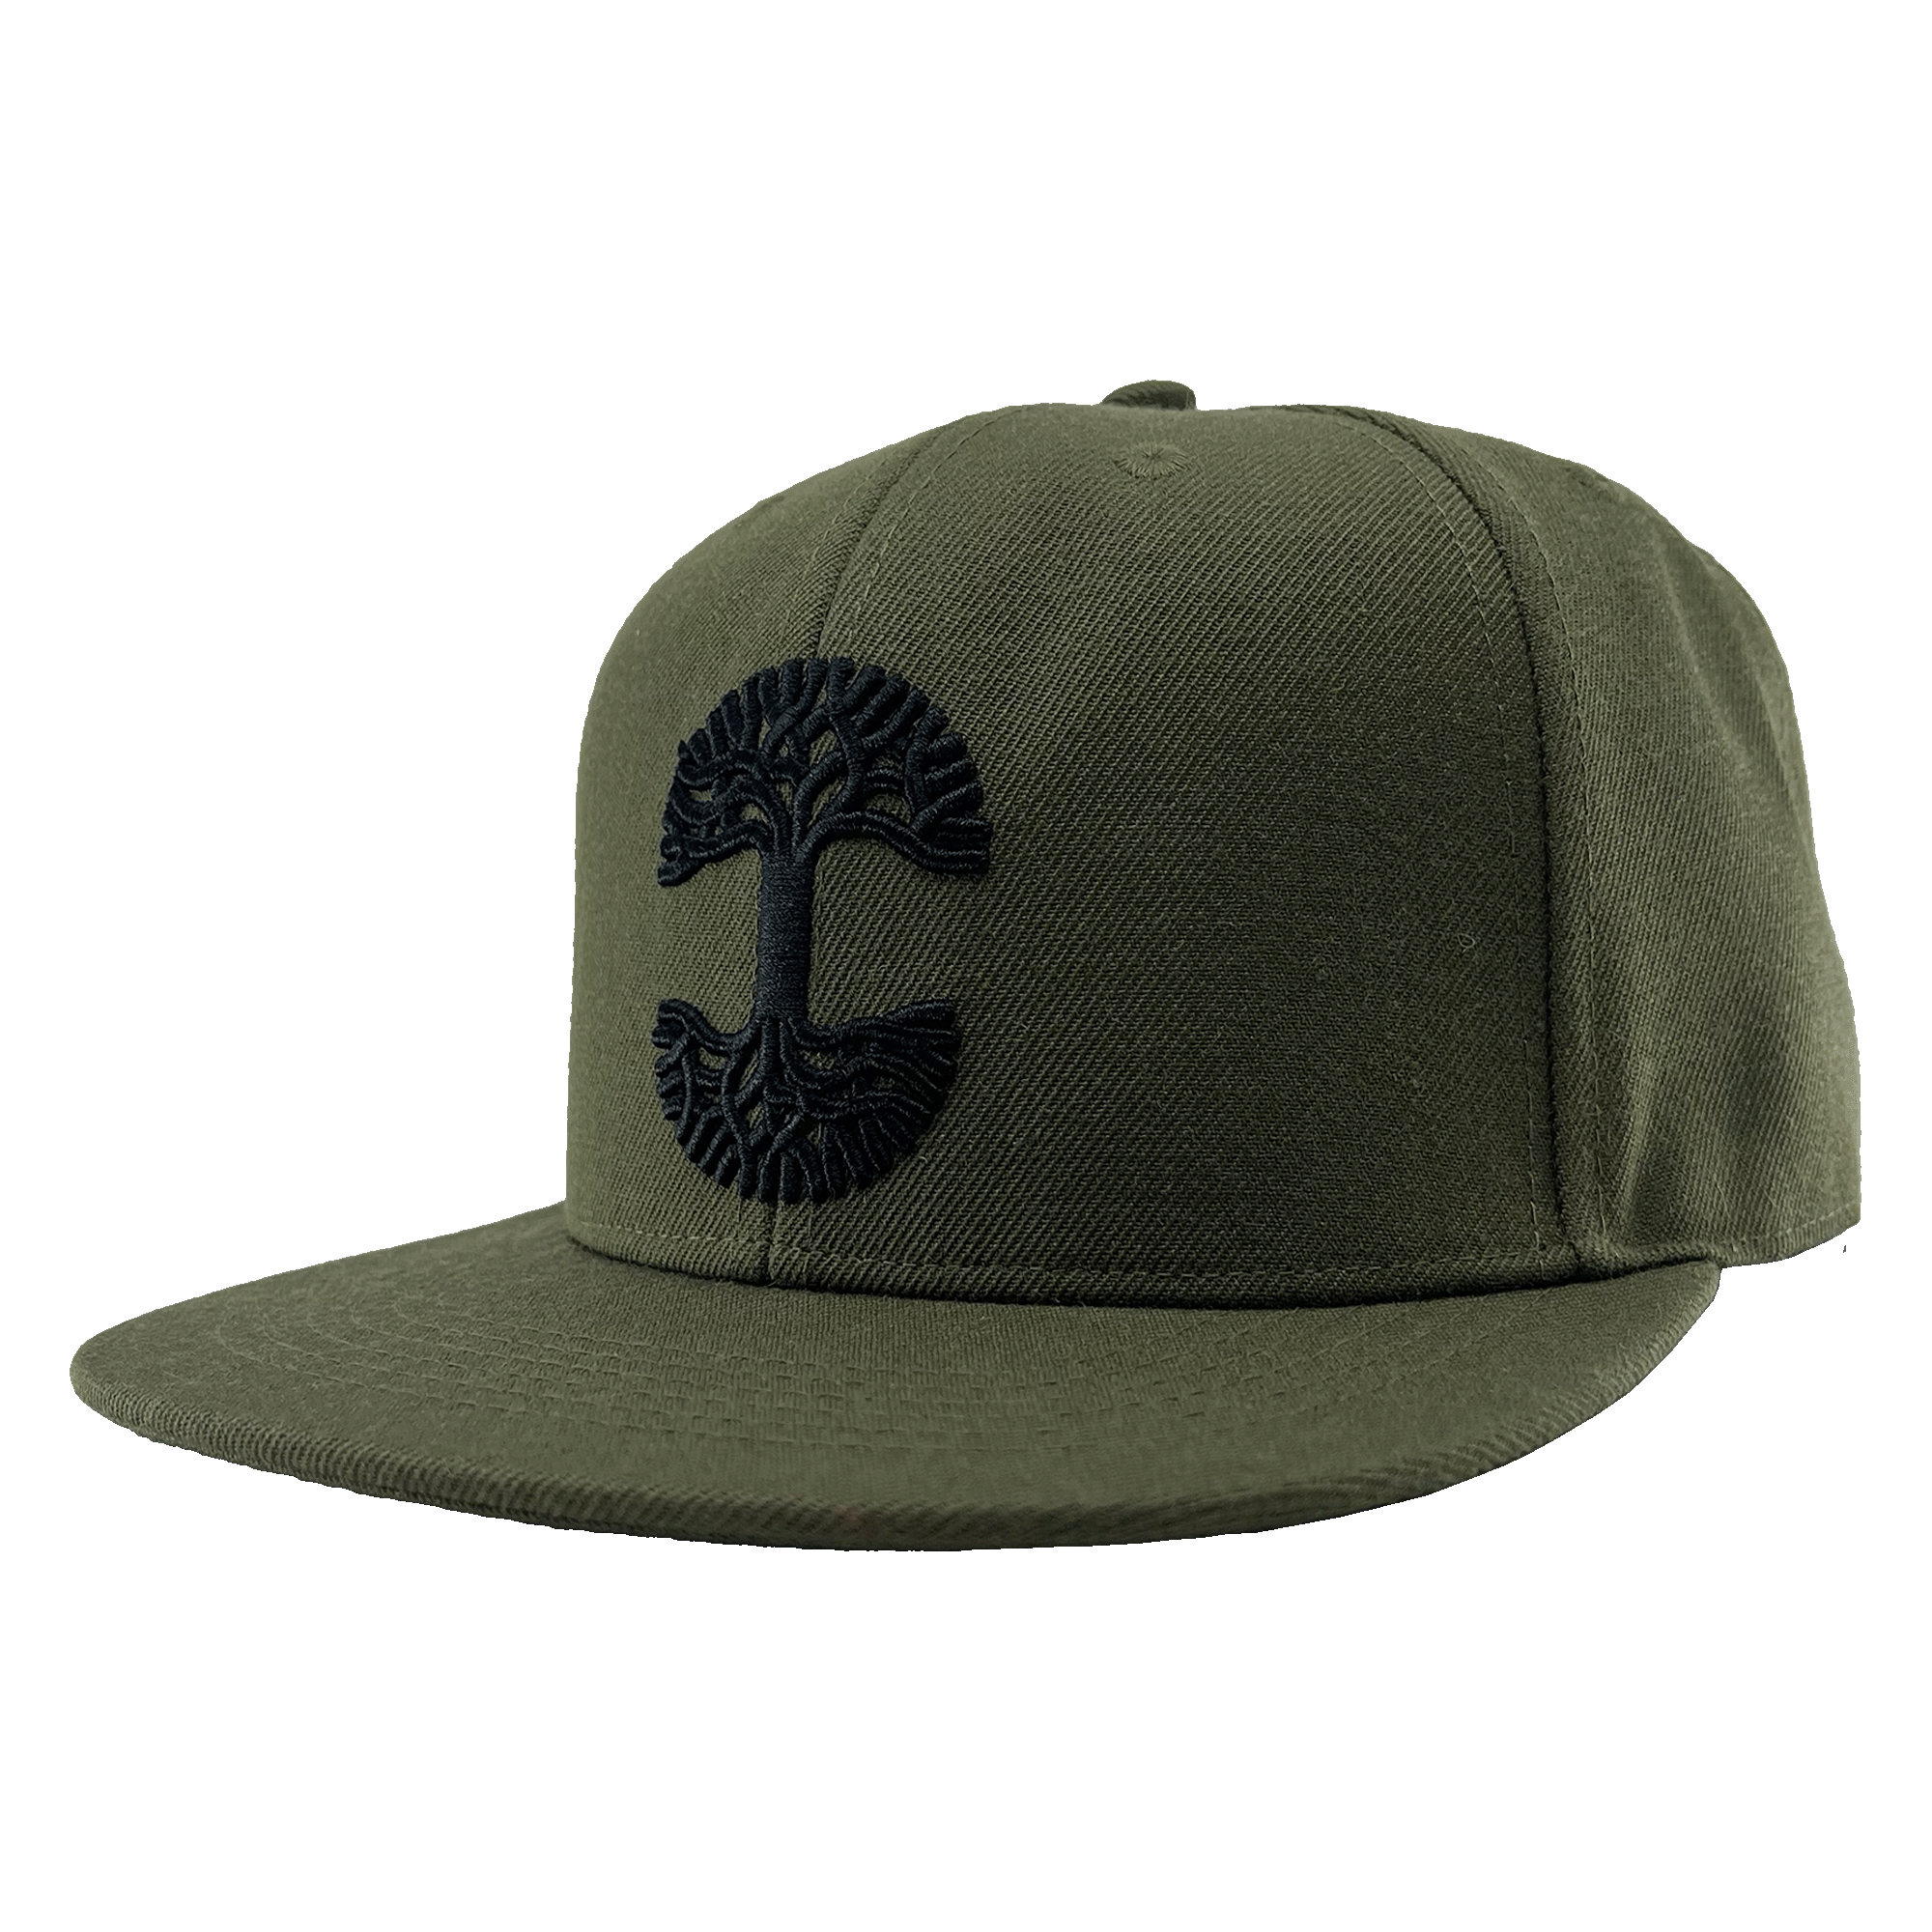 Side view of green snapback hat with black embroidered Oaklandish tree logo on the crown, flat square bill and black embroidered details.